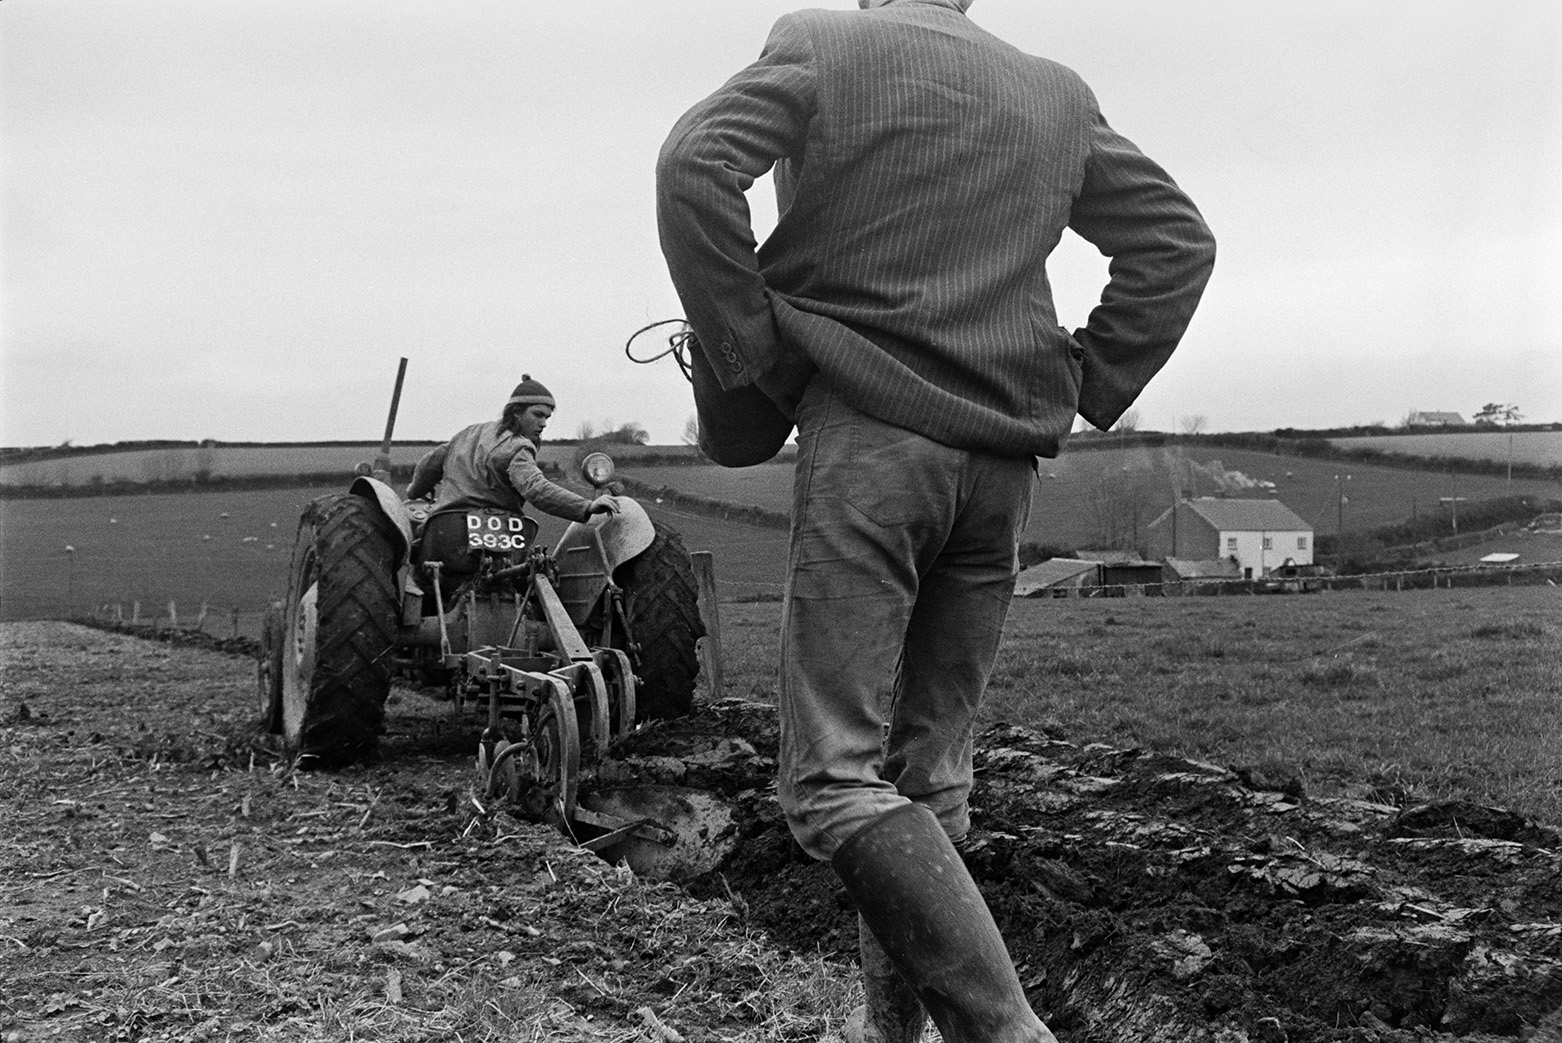 Derek Bright ploughing a field so it is ready to plant corn at Mill Road Farm, Beaford. He is looking over his shoulder to check the furrow. A man is walking along the field, following him and a cottage can be seen in the background. The farm was also known as Jeffrys.